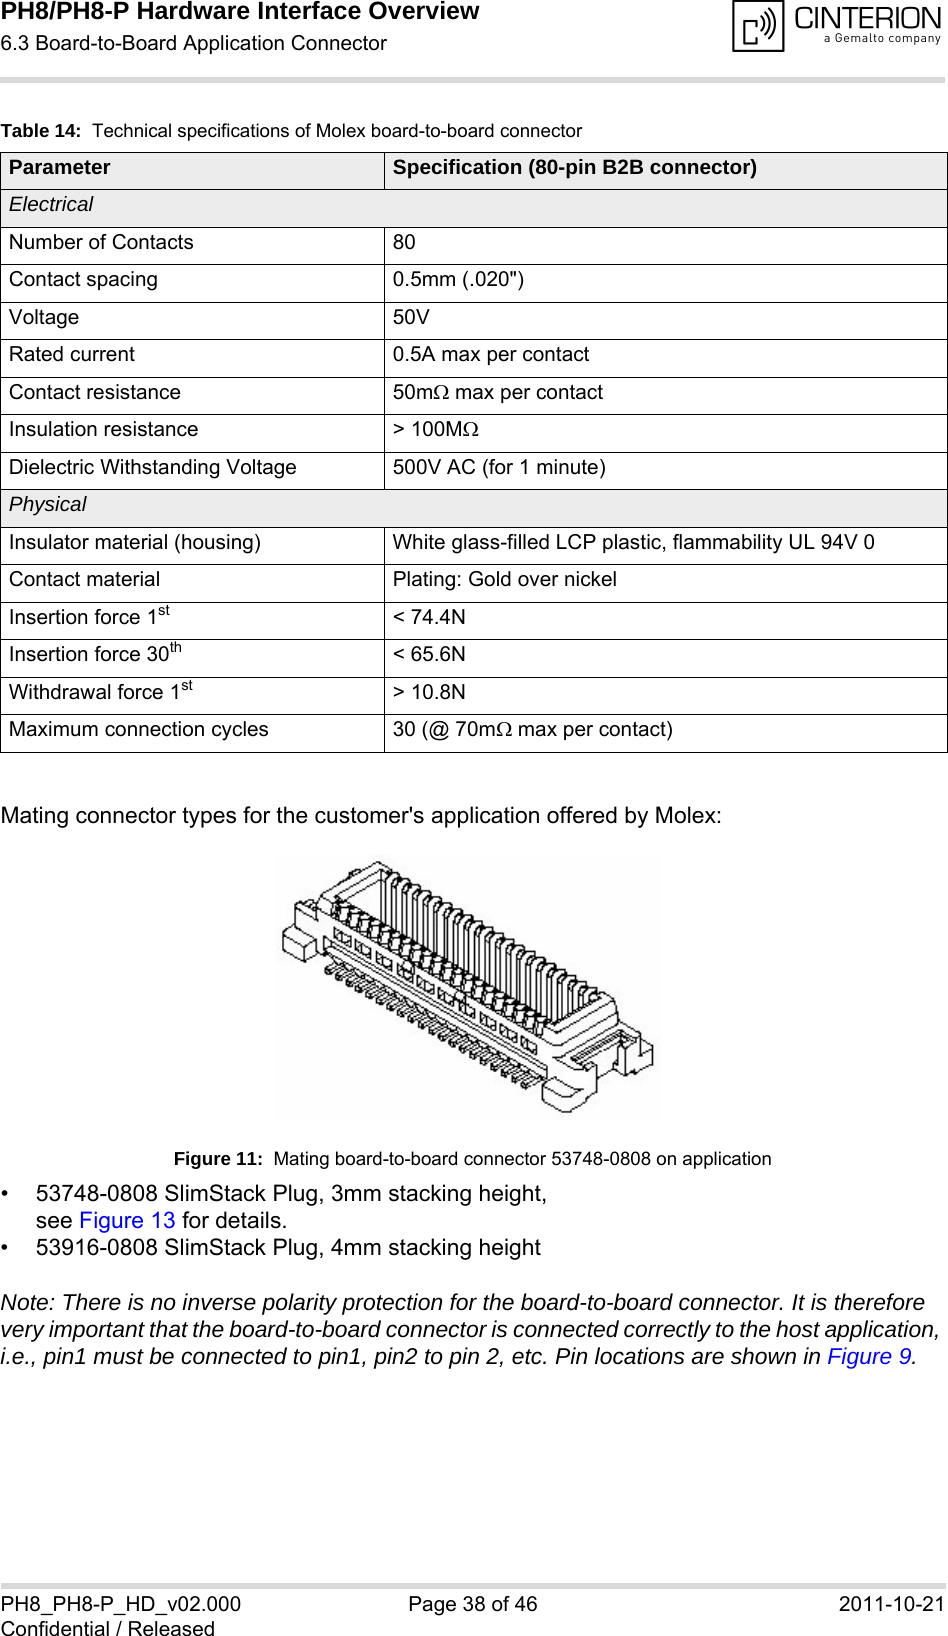 PH8/PH8-P Hardware Interface Overview6.3 Board-to-Board Application Connector40PH8_PH8-P_HD_v02.000 Page 38 of 46 2011-10-21Confidential / ReleasedMating connector types for the customer&apos;s application offered by Molex:Figure 11:  Mating board-to-board connector 53748-0808 on application• 53748-0808 SlimStack Plug, 3mm stacking height, see Figure 13 for details.• 53916-0808 SlimStack Plug, 4mm stacking heightNote: There is no inverse polarity protection for the board-to-board connector. It is therefore very important that the board-to-board connector is connected correctly to the host application, i.e., pin1 must be connected to pin1, pin2 to pin 2, etc. Pin locations are shown in Figure 9.Table 14:  Technical specifications of Molex board-to-board connectorParameter Specification (80-pin B2B connector)ElectricalNumber of Contacts 80Contact spacing 0.5mm (.020&quot;)Voltage 50VRated current 0.5A max per contactContact resistance 50m max per contactInsulation resistance &gt; 100MDielectric Withstanding Voltage 500V AC (for 1 minute)PhysicalInsulator material (housing) White glass-filled LCP plastic, flammability UL 94V 0Contact material Plating: Gold over nickelInsertion force 1st &lt; 74.4NInsertion force 30th &lt; 65.6NWithdrawal force 1st &gt; 10.8NMaximum connection cycles 30 (@ 70m max per contact)